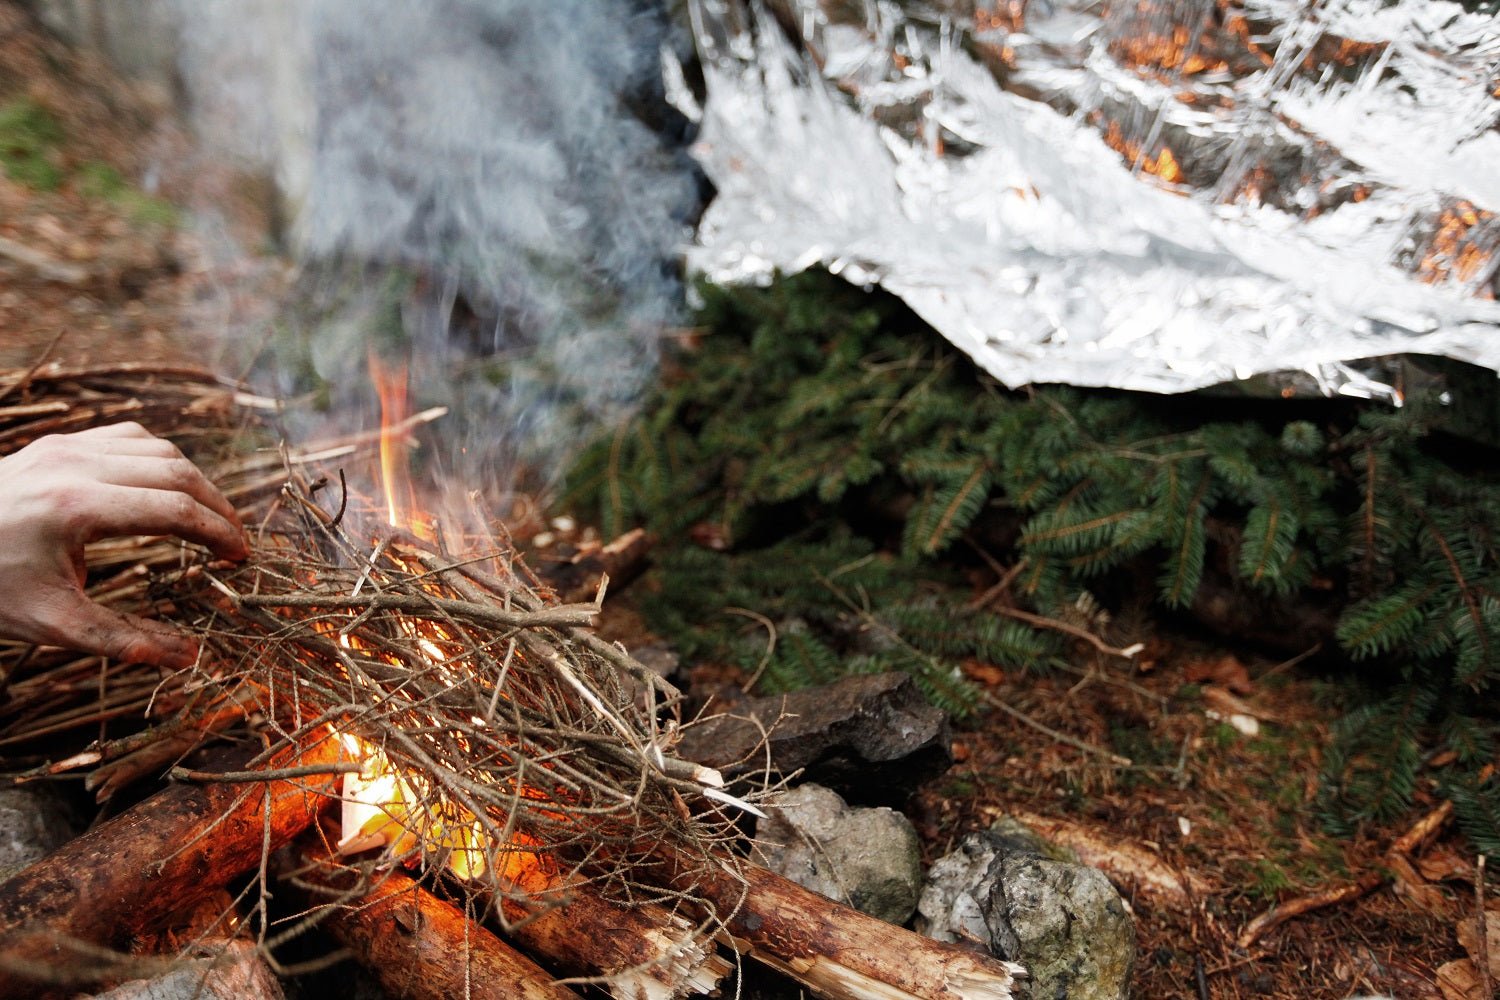 Basic Survival Skills - Why Everyone Can Benefit From Them